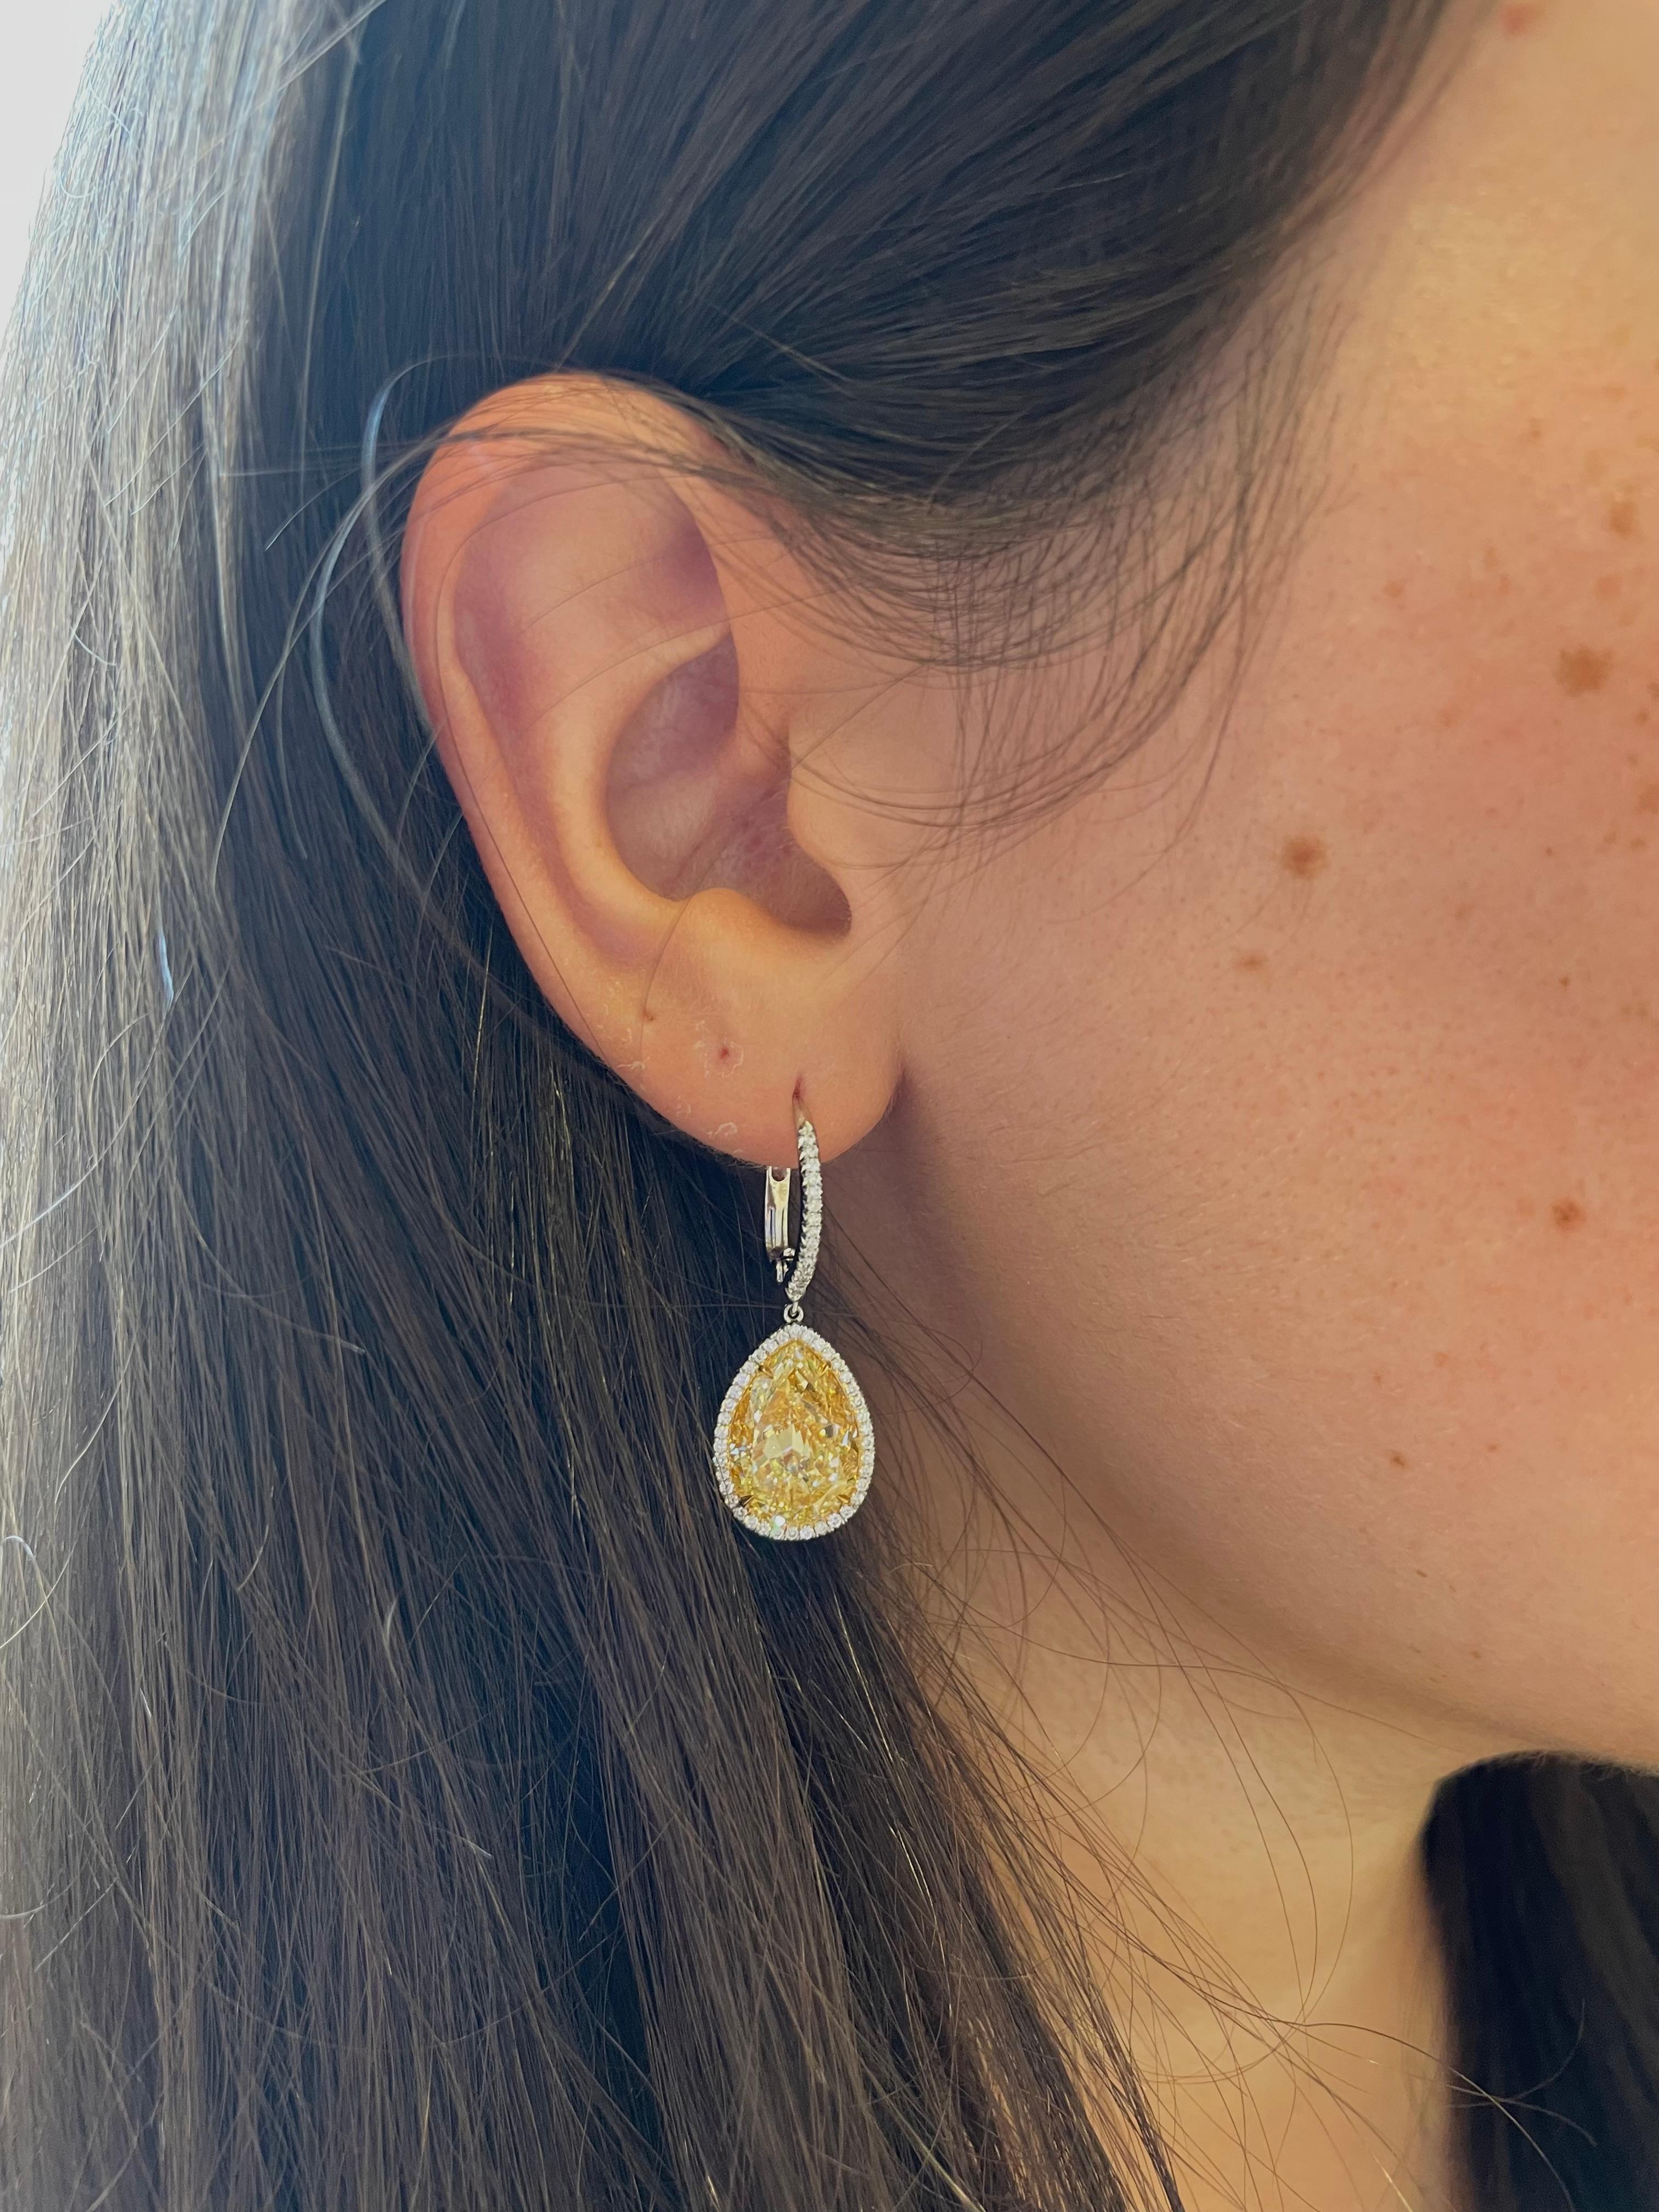 These spectacular yellow diamond earrings are like wearing drops of sunshine! This beautifully matched pair of pear shaped yellow diamonds are certified by GIA as Fancy Yellow color and VS2 clarity, and together they total 12.16 carats. A delicate